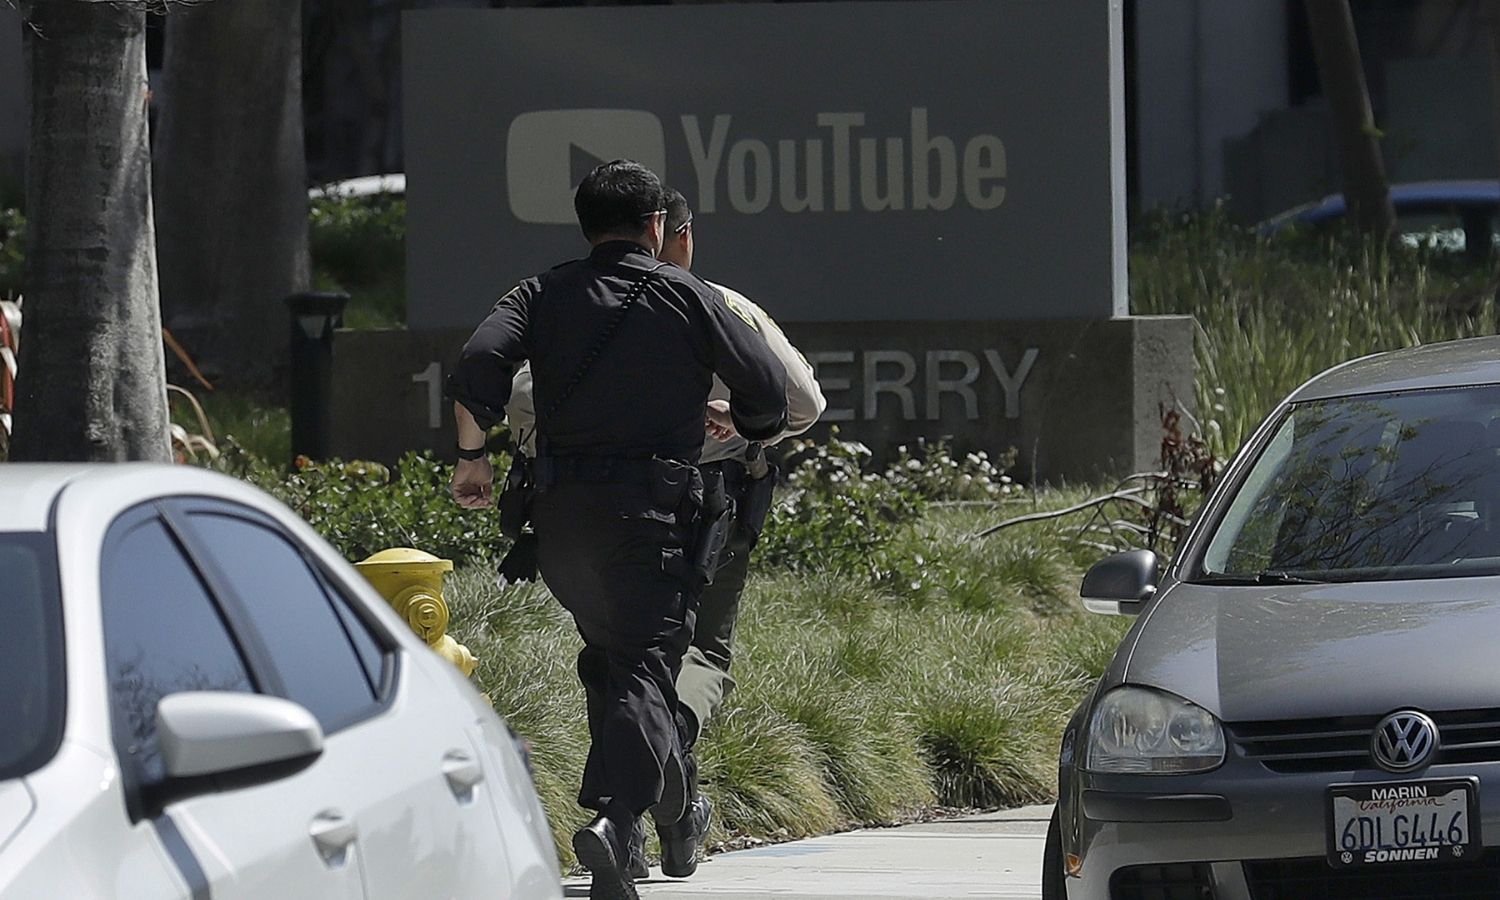 OTD in 2018: A shooting took place at YouTube's headquarters in San Bruno